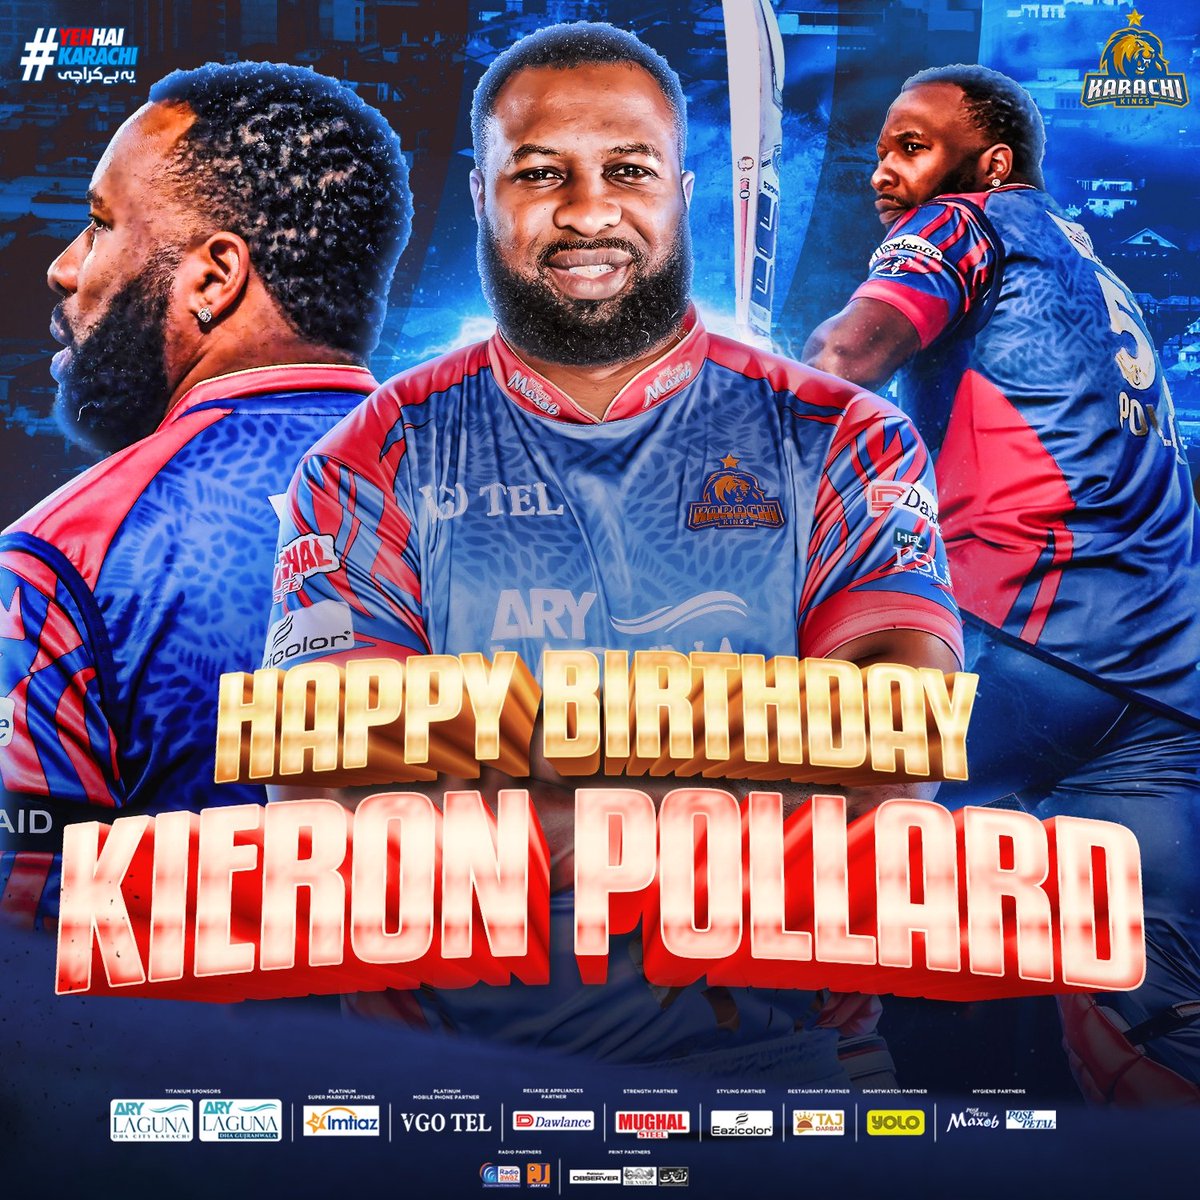 Happy Birthday to The Powerhouse of #KingsSquad, Kieron Pollard! Here's to another year of smashing boundaries and towering sixes! 💥👑 Join us in sending love and best wishes to Polly on his special day! 🎊👏 #YehHaiKarachi | #KarachiKings